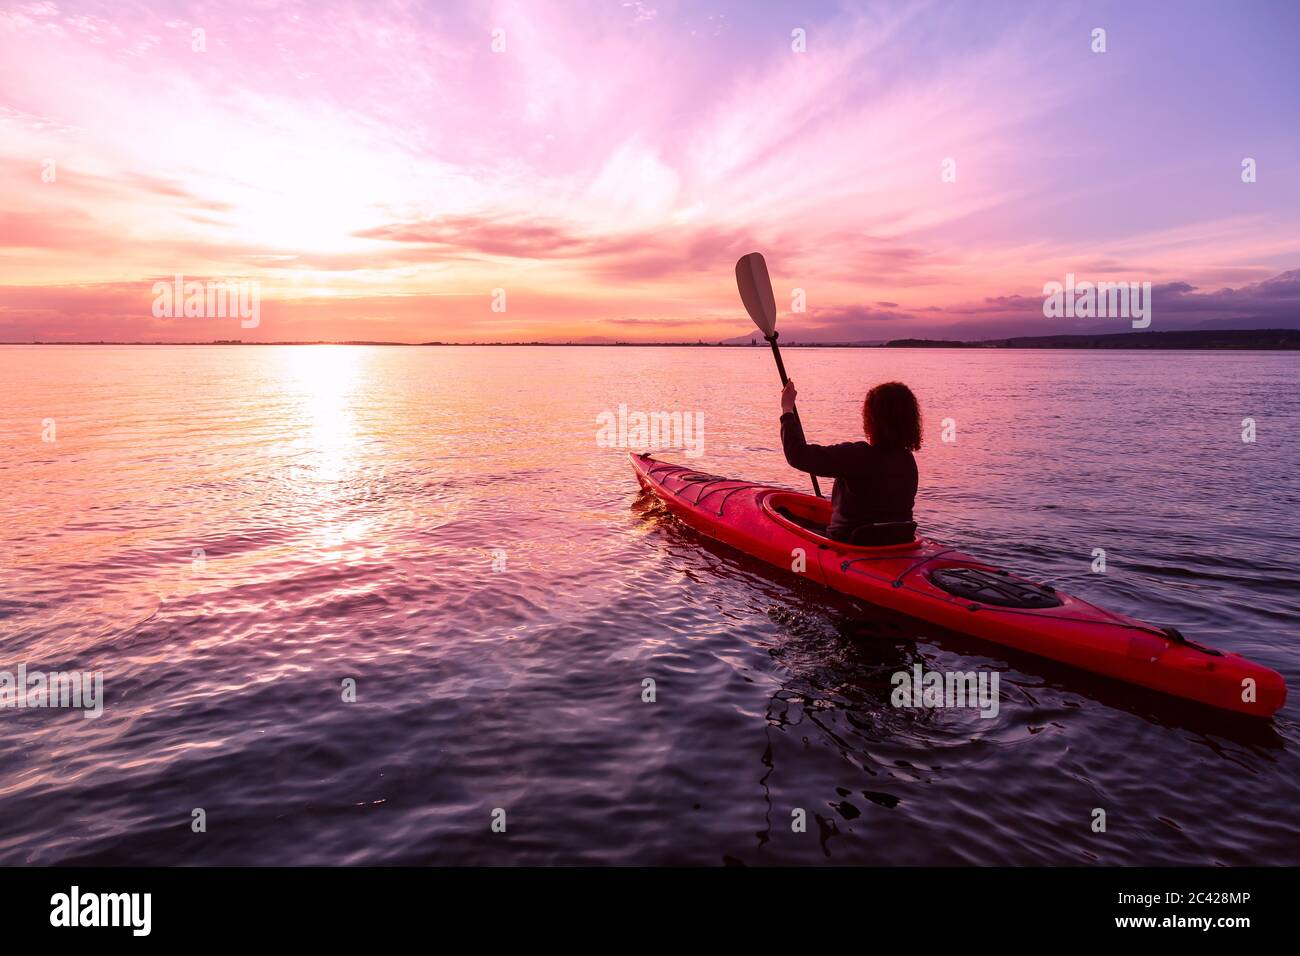 Sea Kayaking in calm waters during a colorful and vibrant sunset. Stock Photo